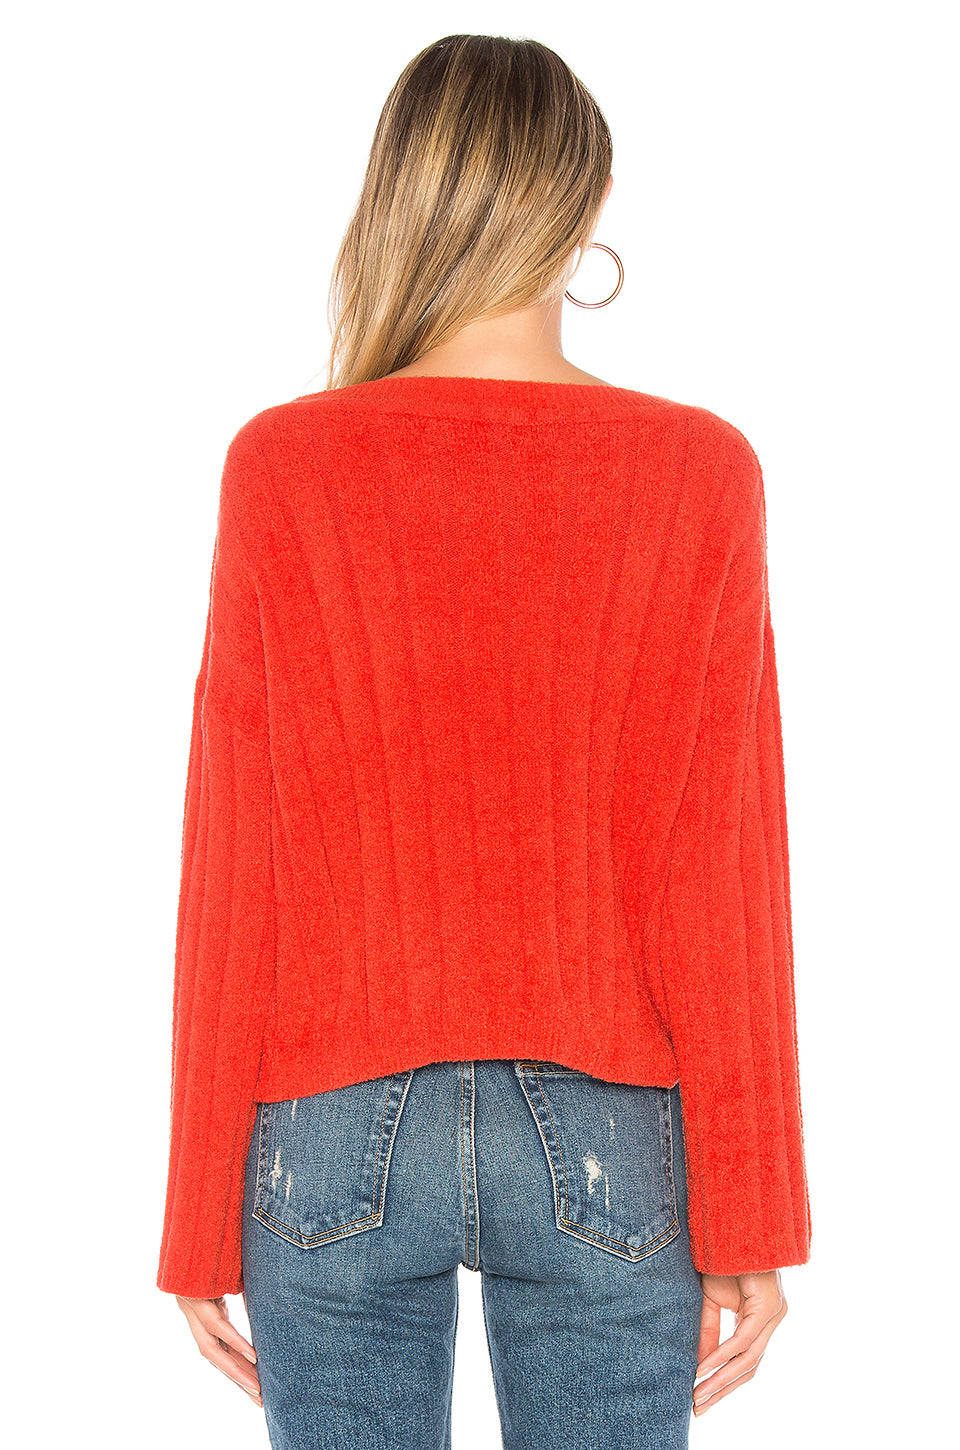 Nora Sweater in RED